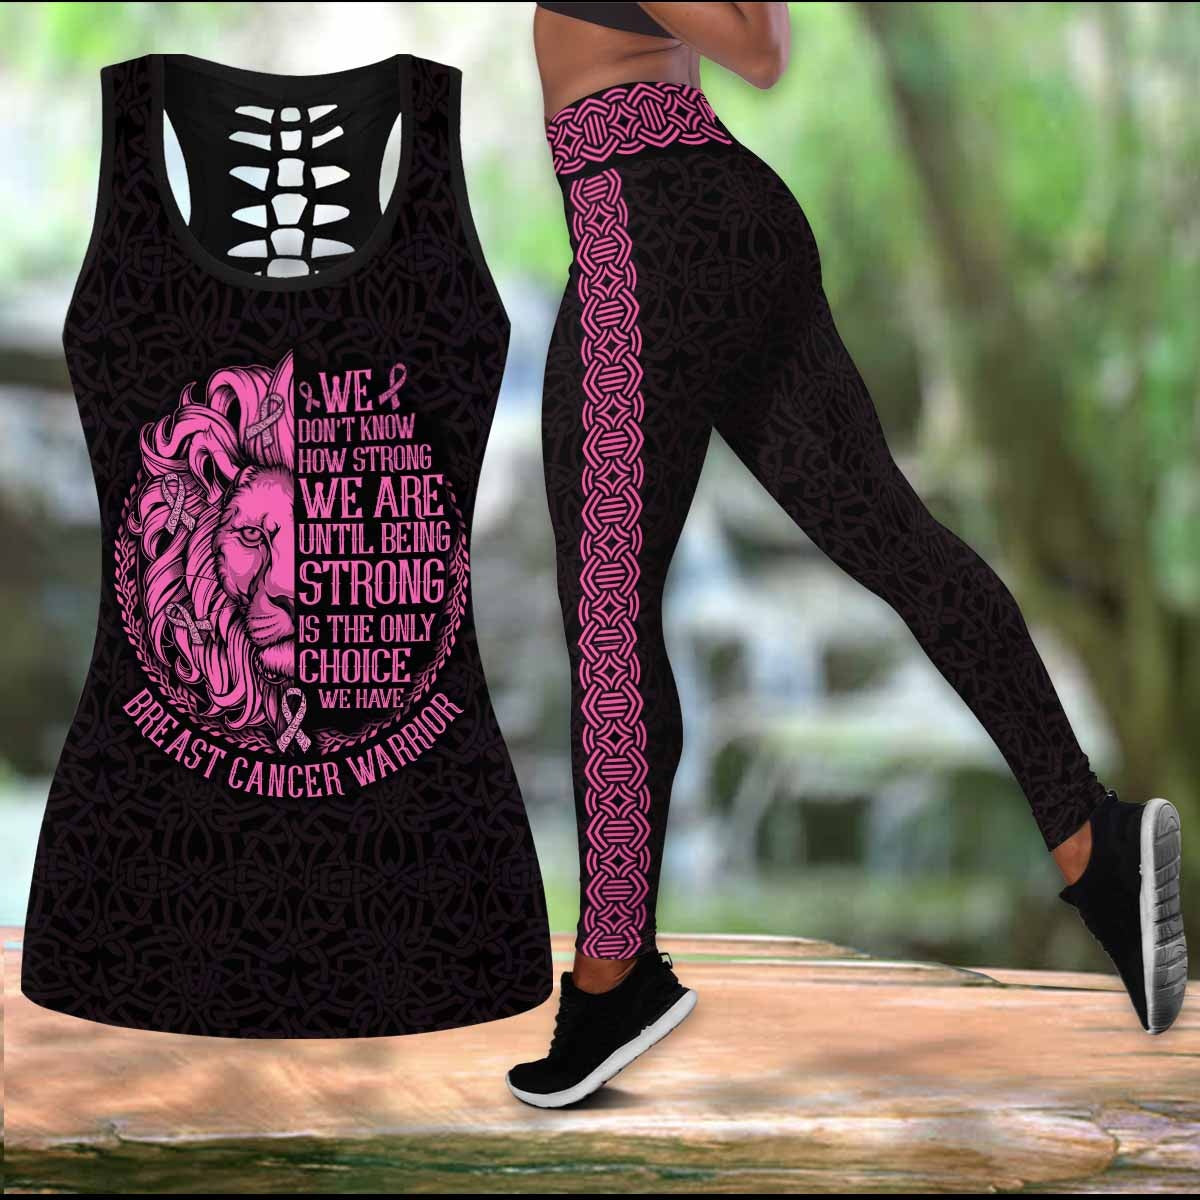 Breast Cancer We Dont Know How Strong We Are Legging Tanktop, Breast Cancer Awareness Legging Tanktop